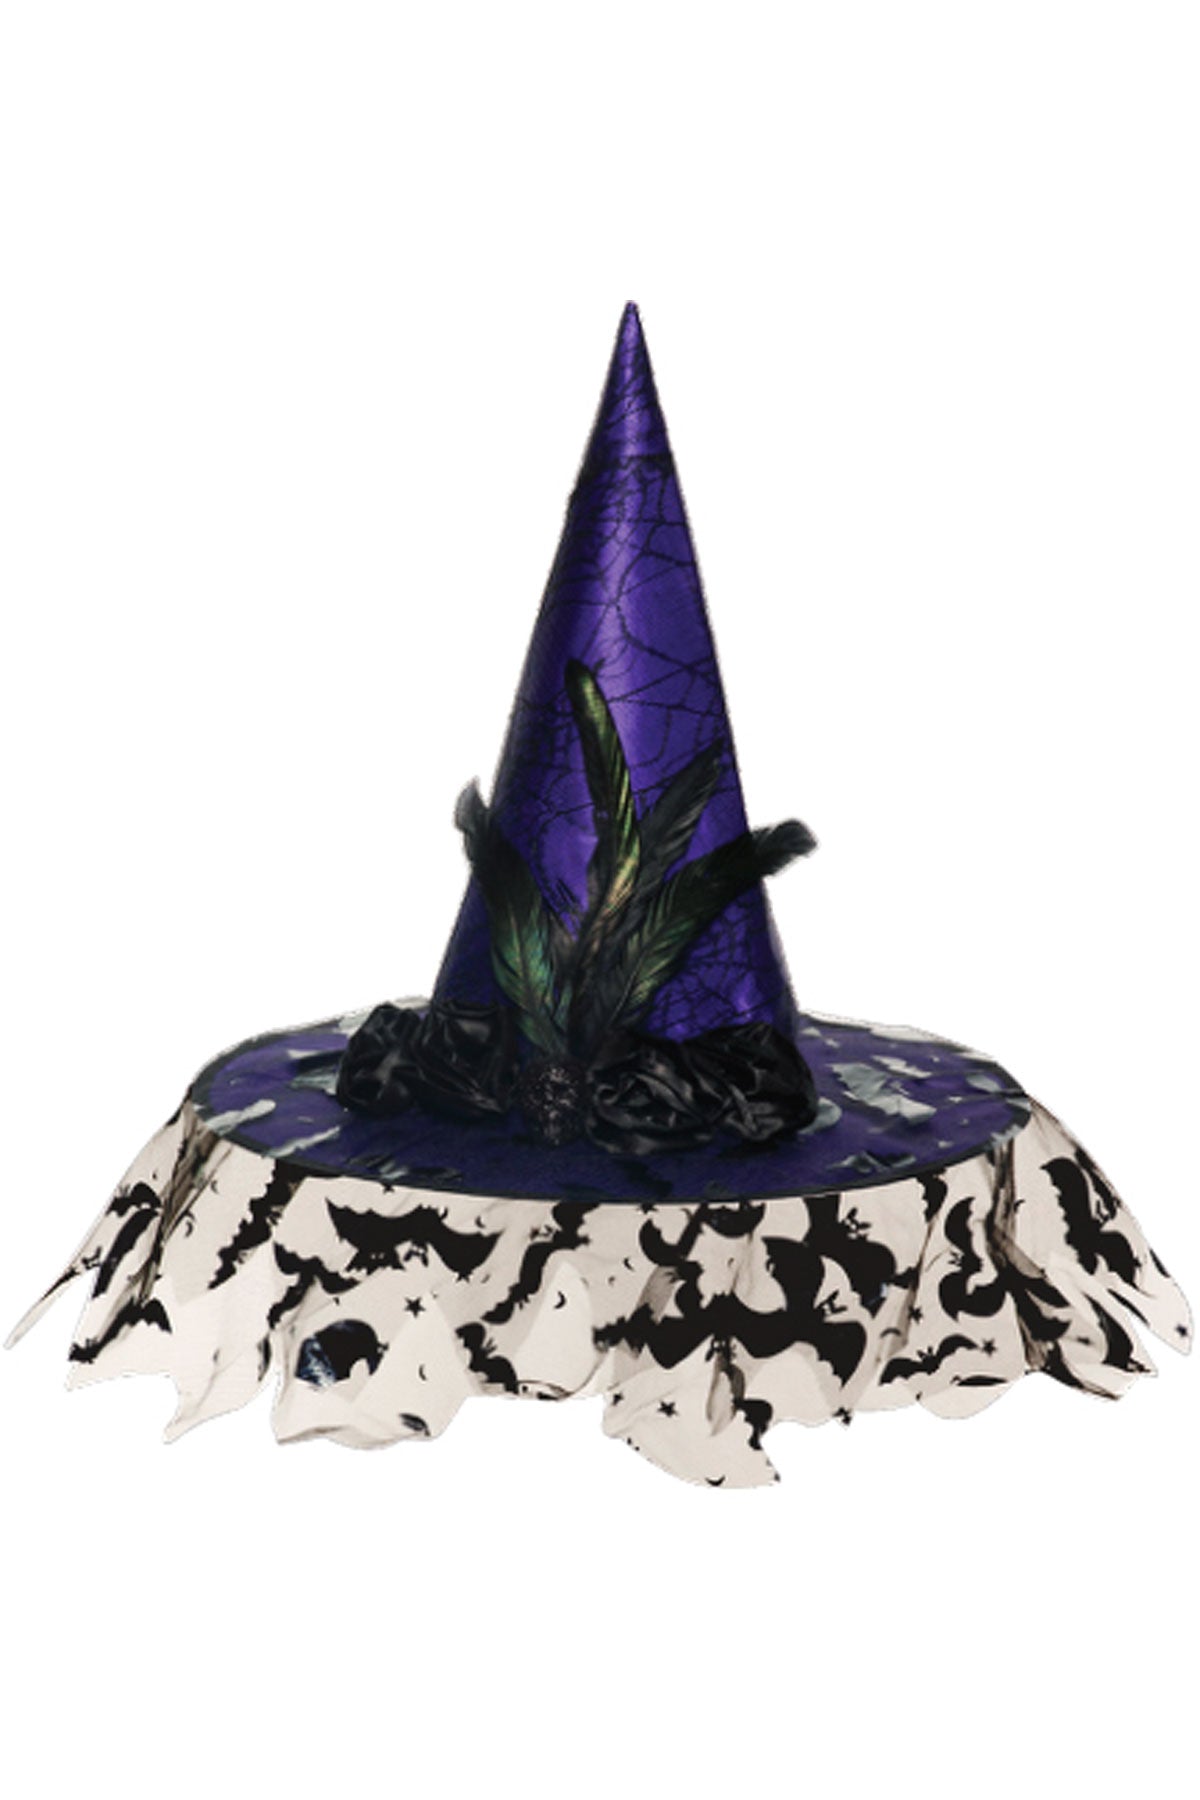 Deluxe Witch Hat With Veil-Purple Underwraps  30786